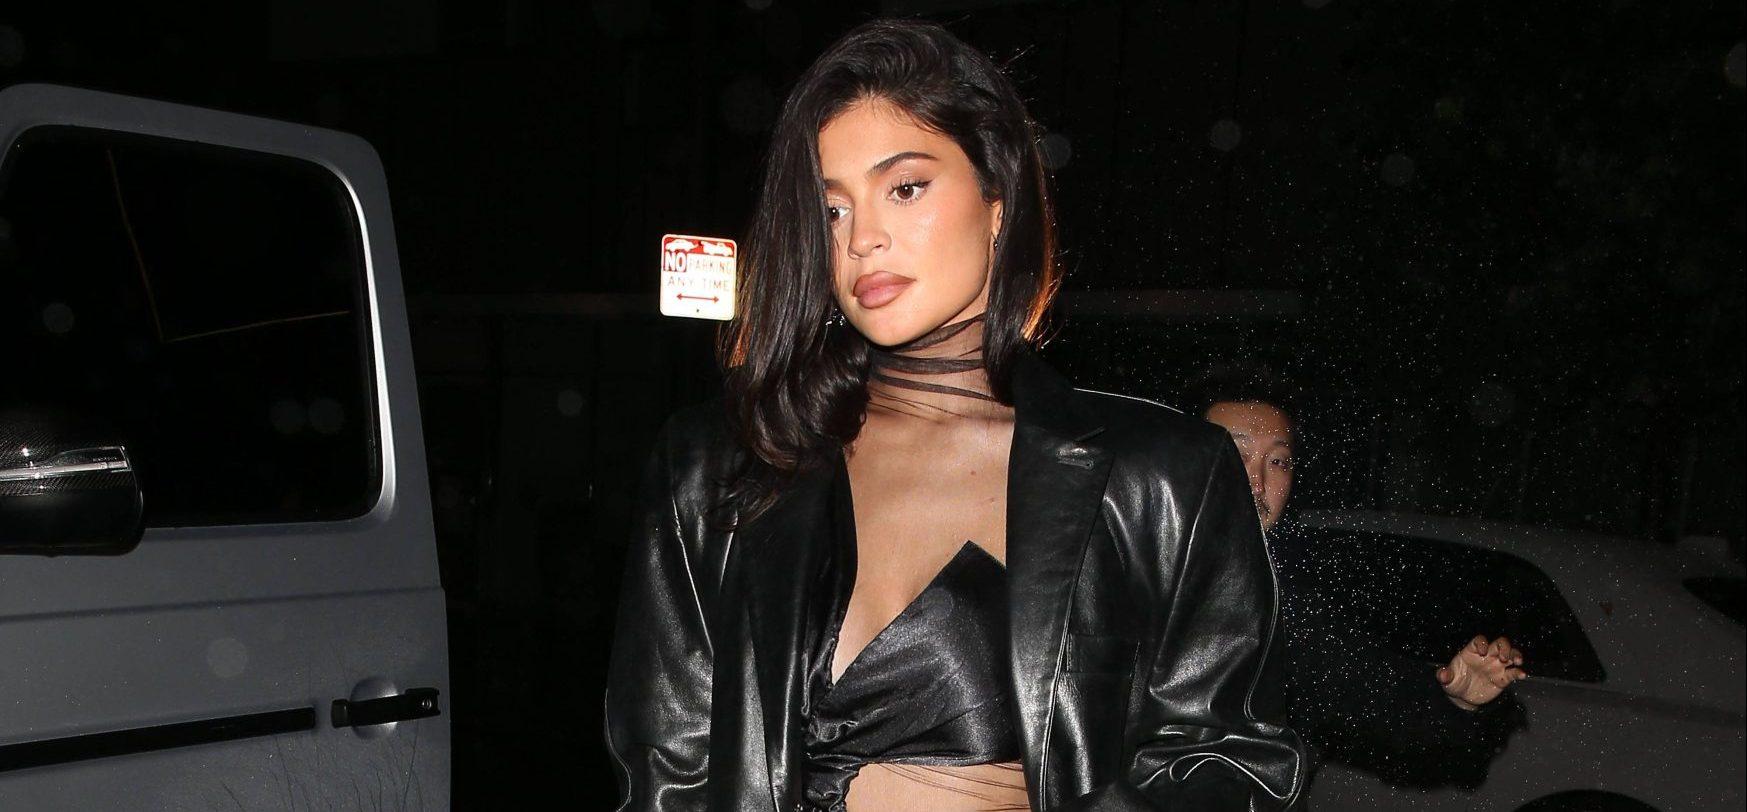 Kylie Jenner Gets Absolutely Destroyed Online For Promoting ‘Kylash’ Mascara With Blurry Pics